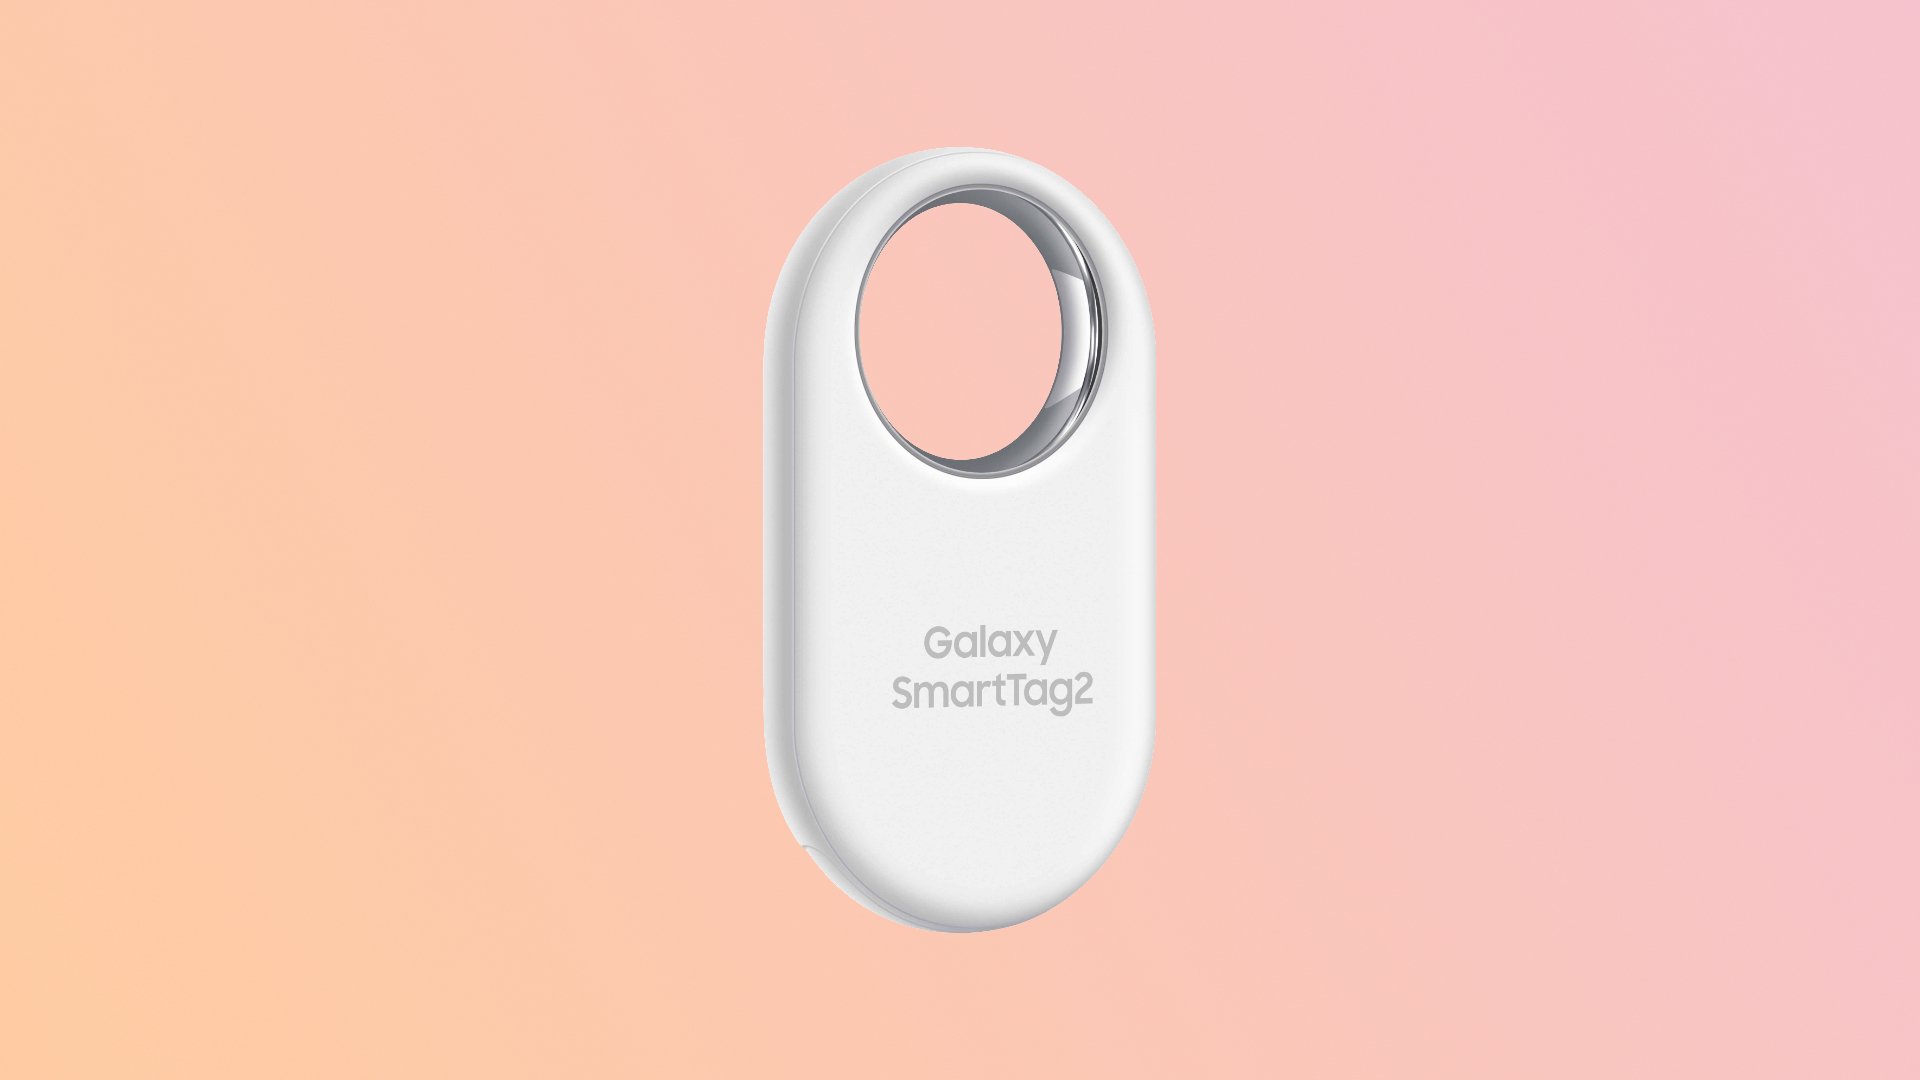 Samsung refreshes the Galaxy SmartTag's design and doubles the battery life